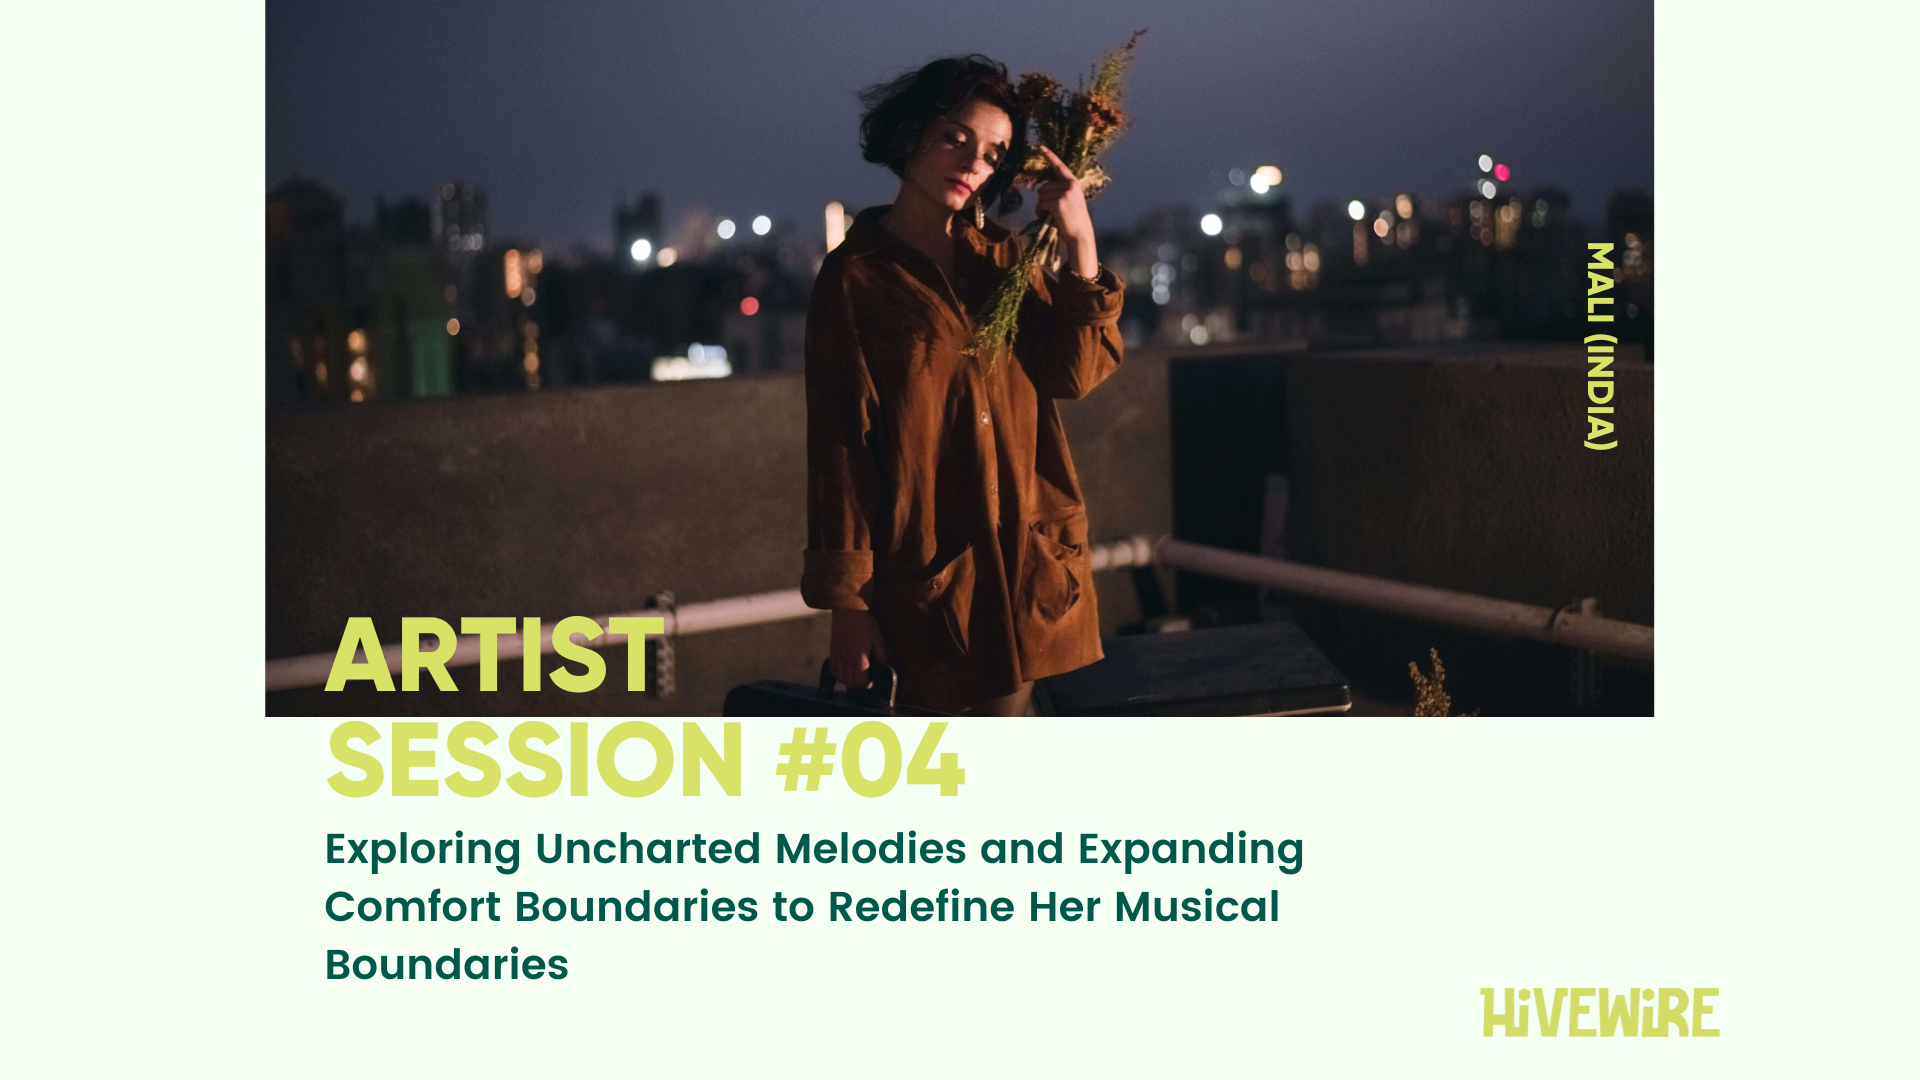 Artist session #04: Mali (IND) - Exploring Uncharted Melodies and ExpandingComfort Boundaries to Redefine Her Musical Boundaries